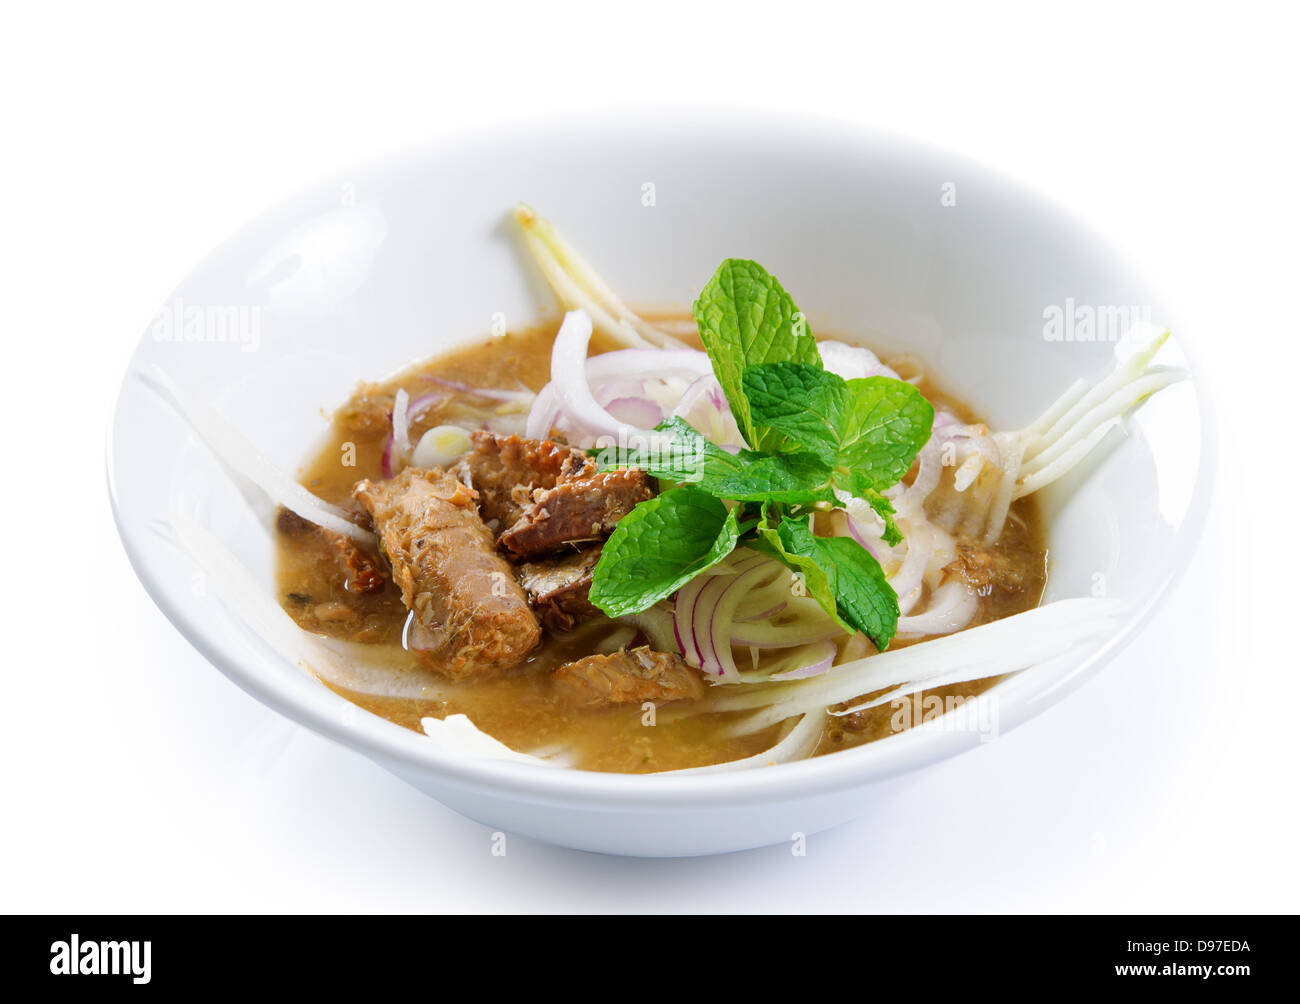 Assam or asam laksa is a sour, fish-based soup. Delicious traditional Malay dish, malaysian food, Asian cuisine. Stock Photo